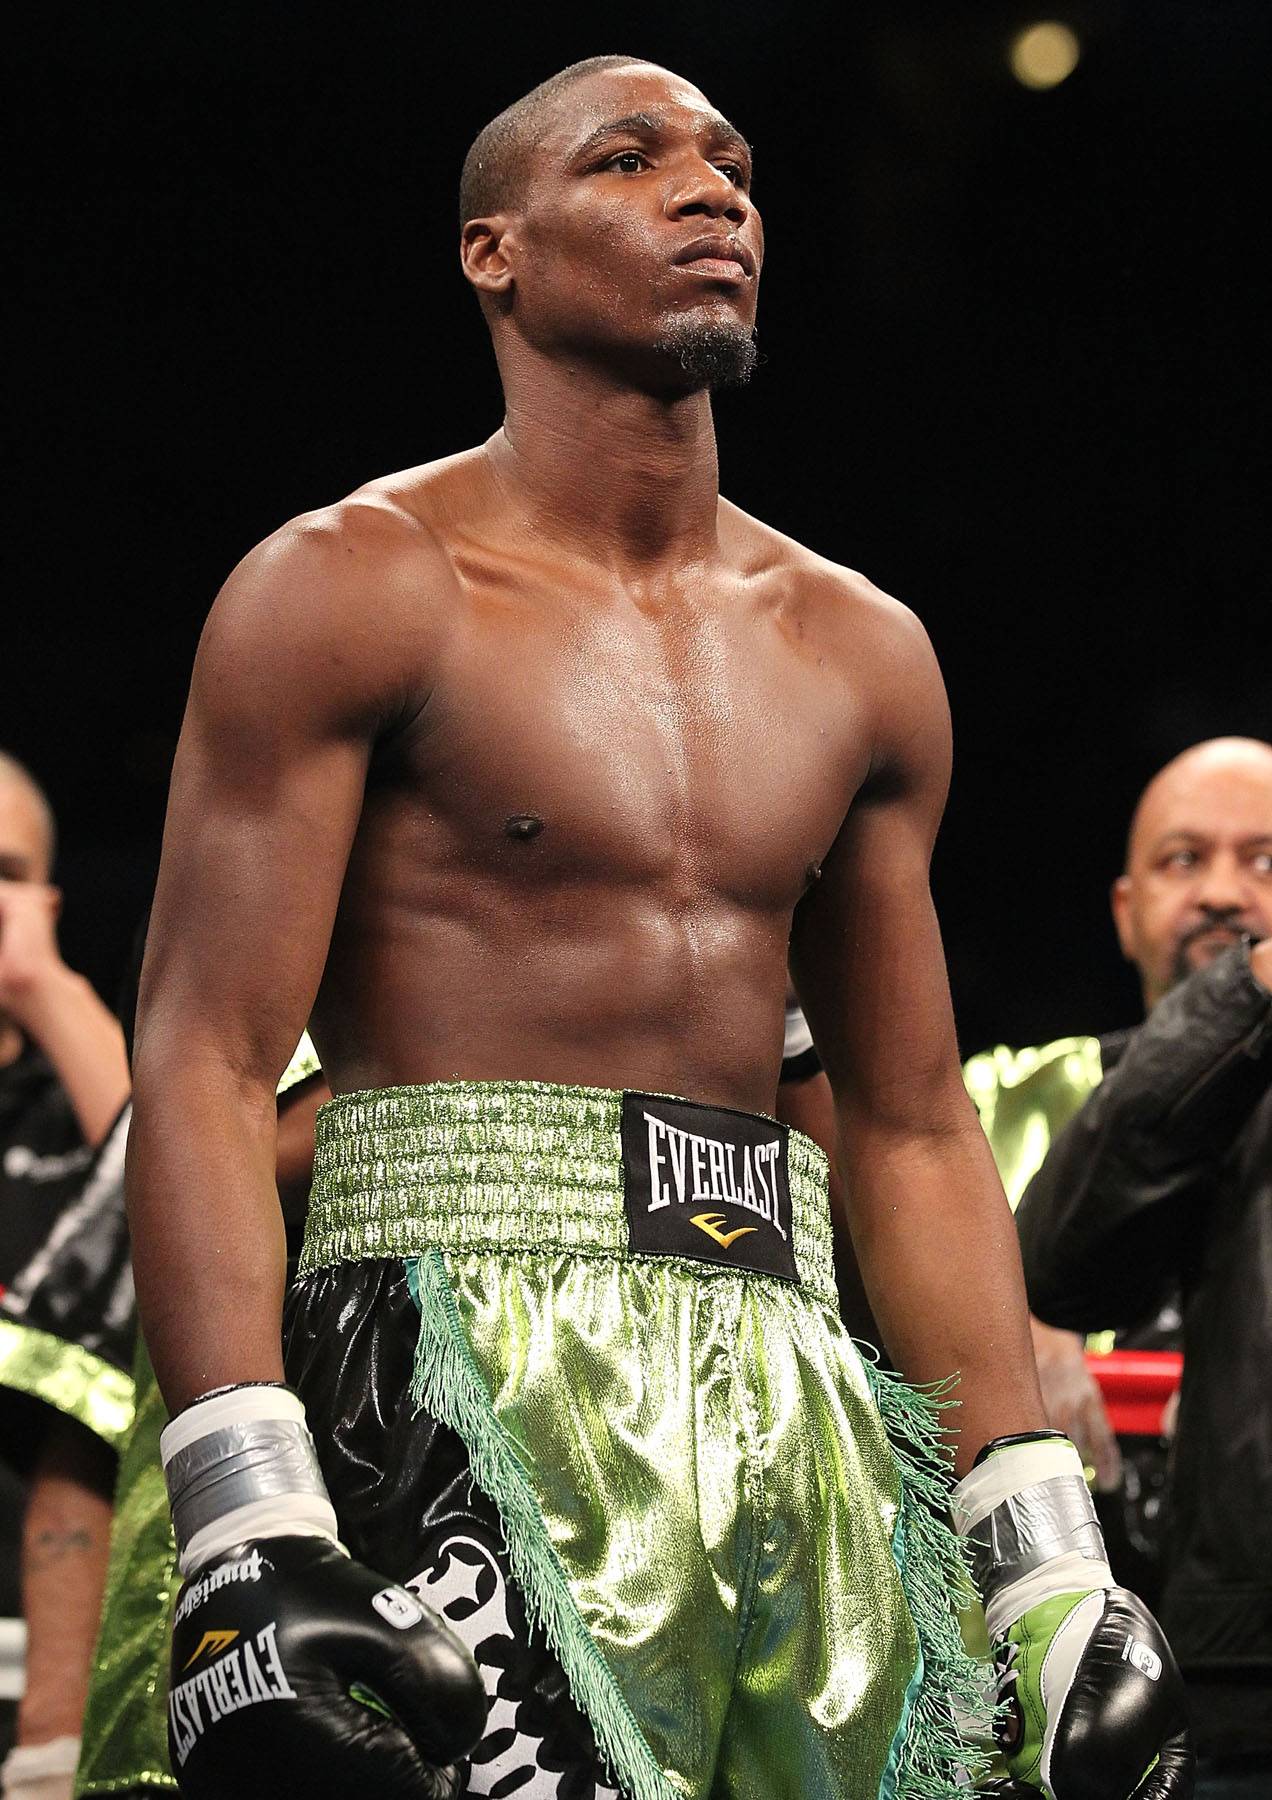 Boxer Paul Williams Paralyzed in Motorcycle Crash - The former two-time welterweight fighter severed his spinal cord after falling on his back and head when he was thrown from his motorcycle in Atlanta on Sunday. He has lost all movement from the waist down, his manager told the Associated Press. Williams was scheduled to fight Saul &quot;Canelo&quot; Alvarez on Sept. 15 in Las Vegas.&nbsp; (Photo: Al Bello/Getty Images)